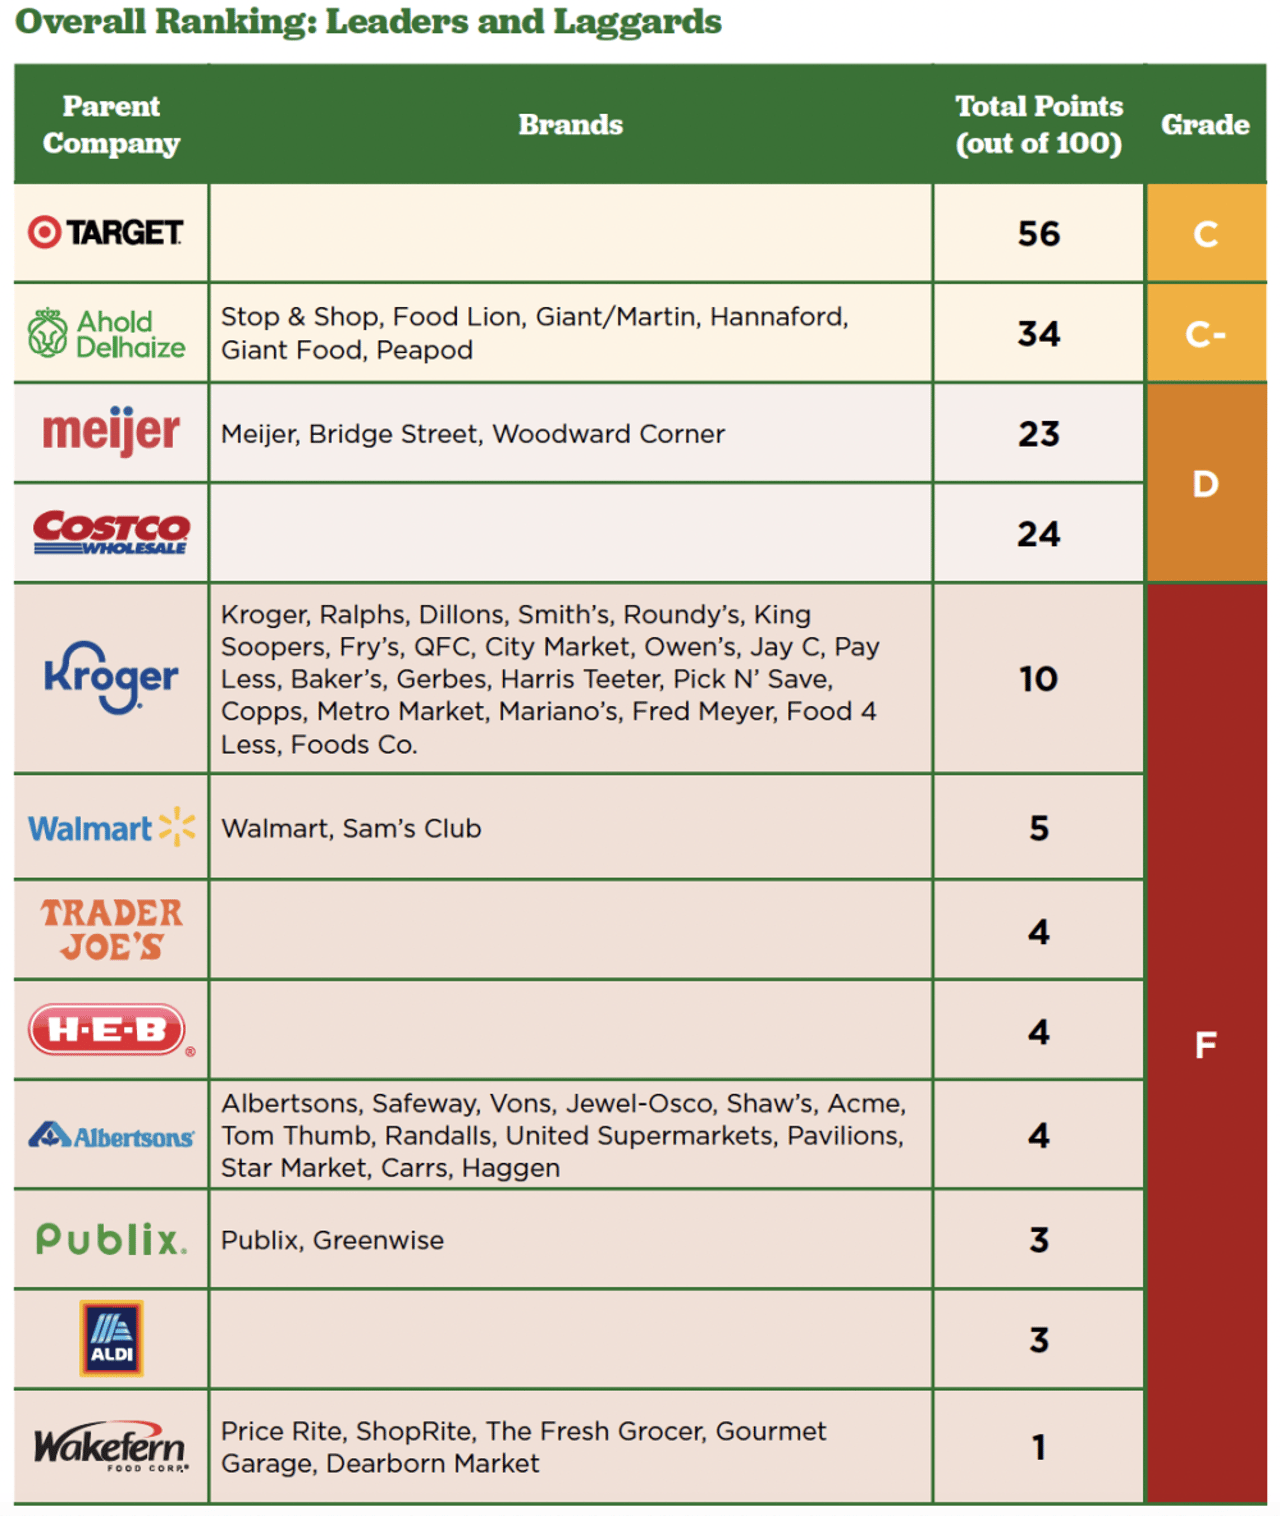 infographic showing a ranking of grocery stores